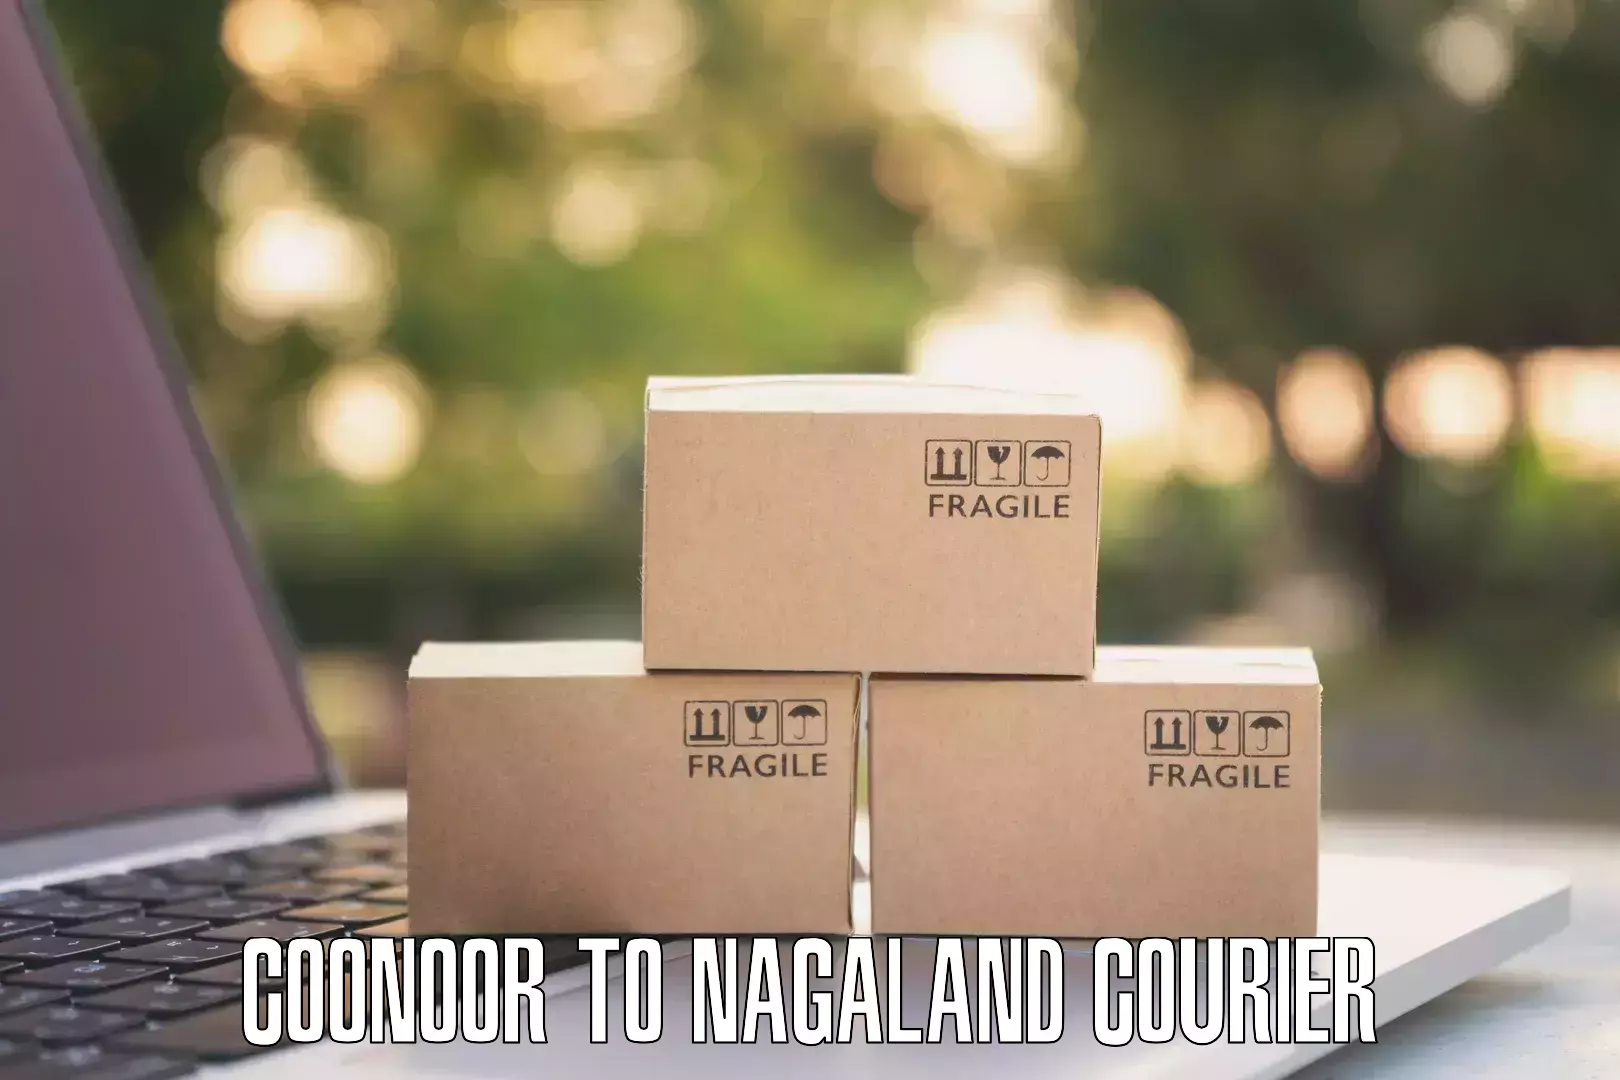 Courier service innovation Coonoor to Nagaland